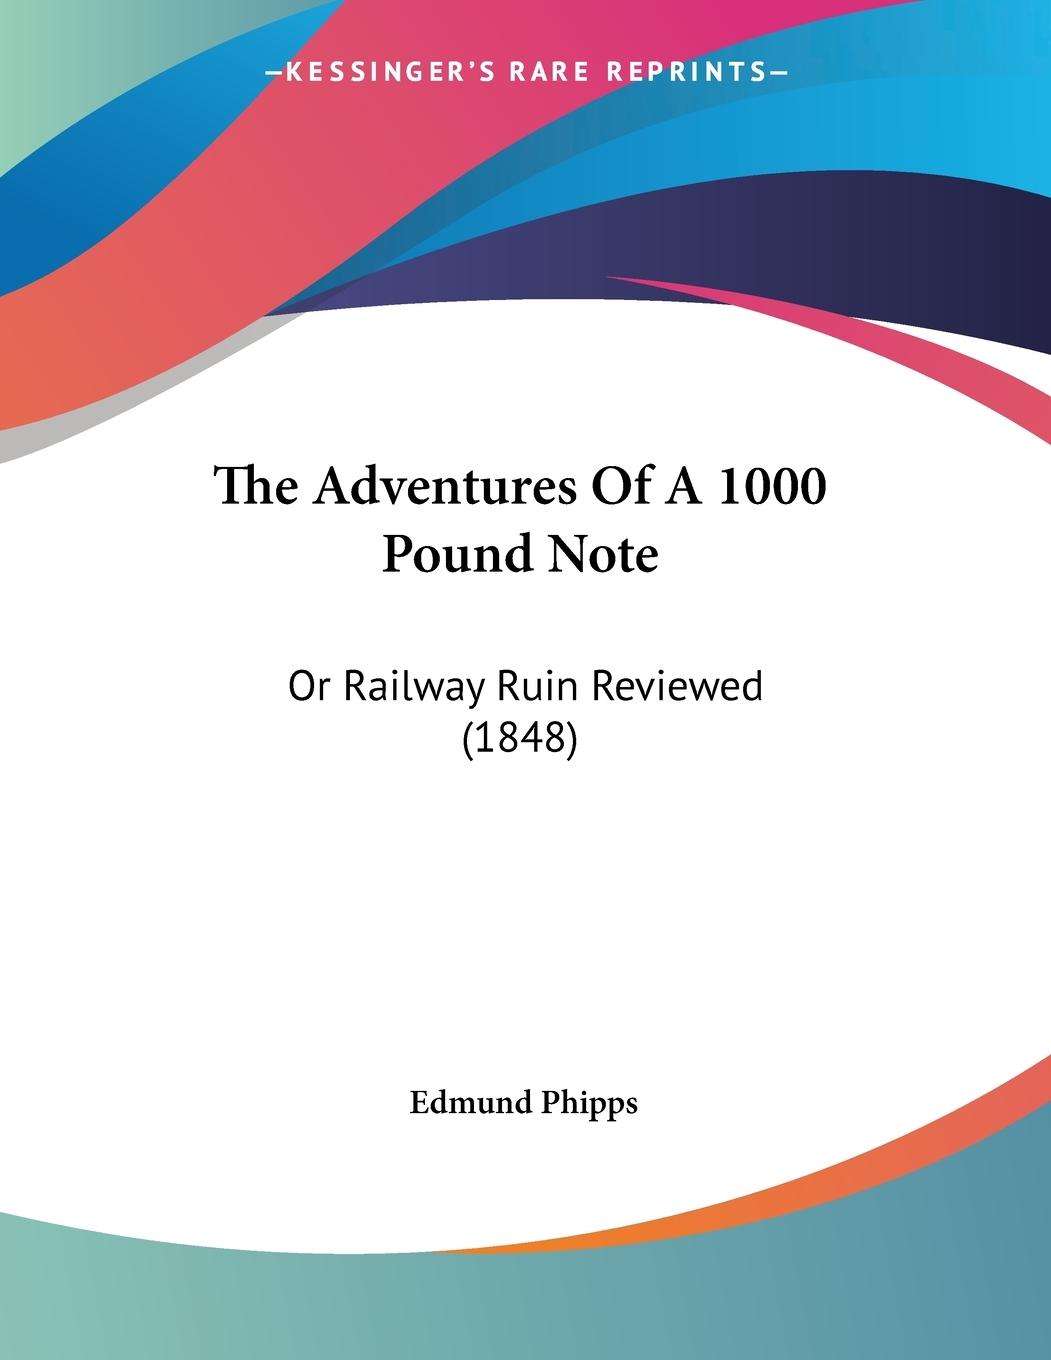 The Adventures Of A 1000 Pound Note - Phipps, Edmund